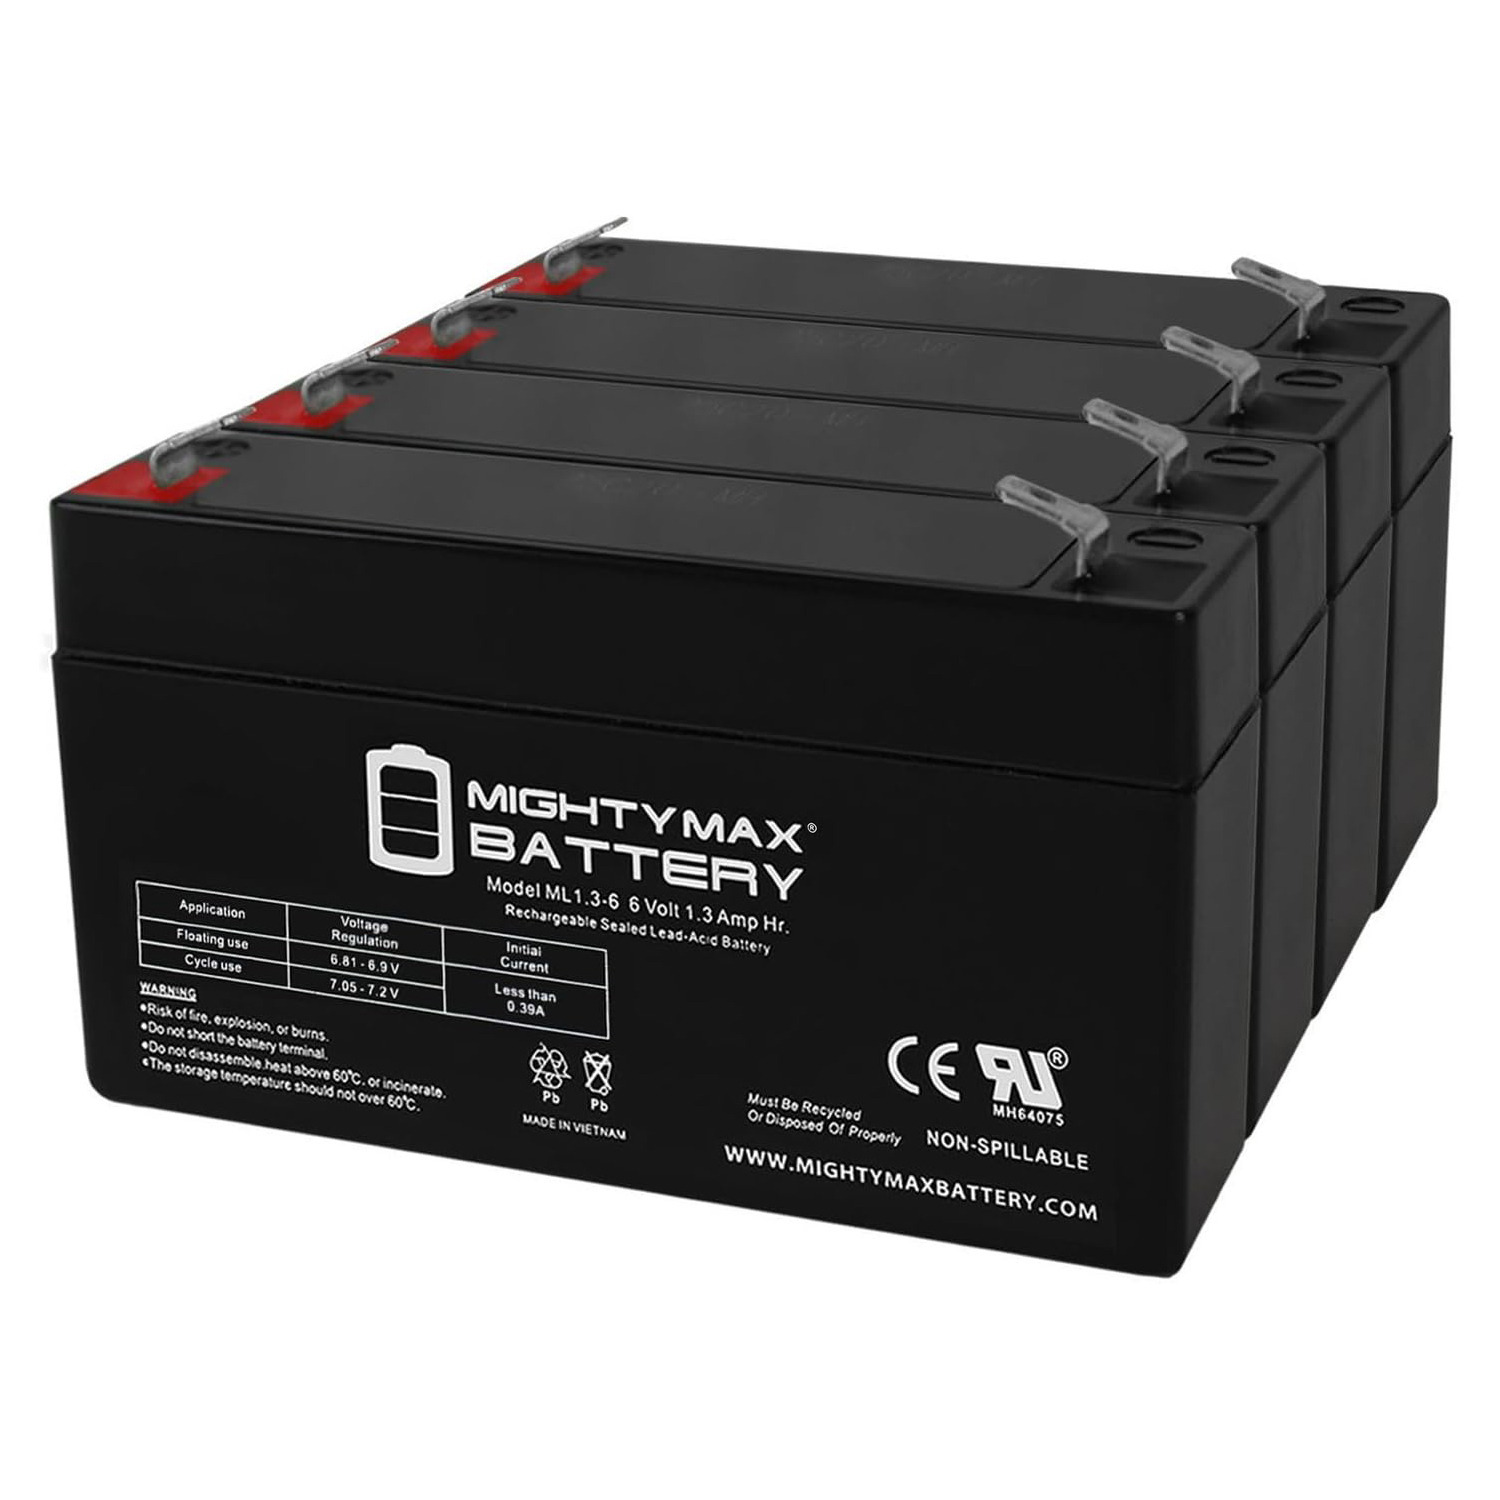 6V 1.3Ah SLA Replacement Battery for NPP NP6-1.3Ah - 4 Pack